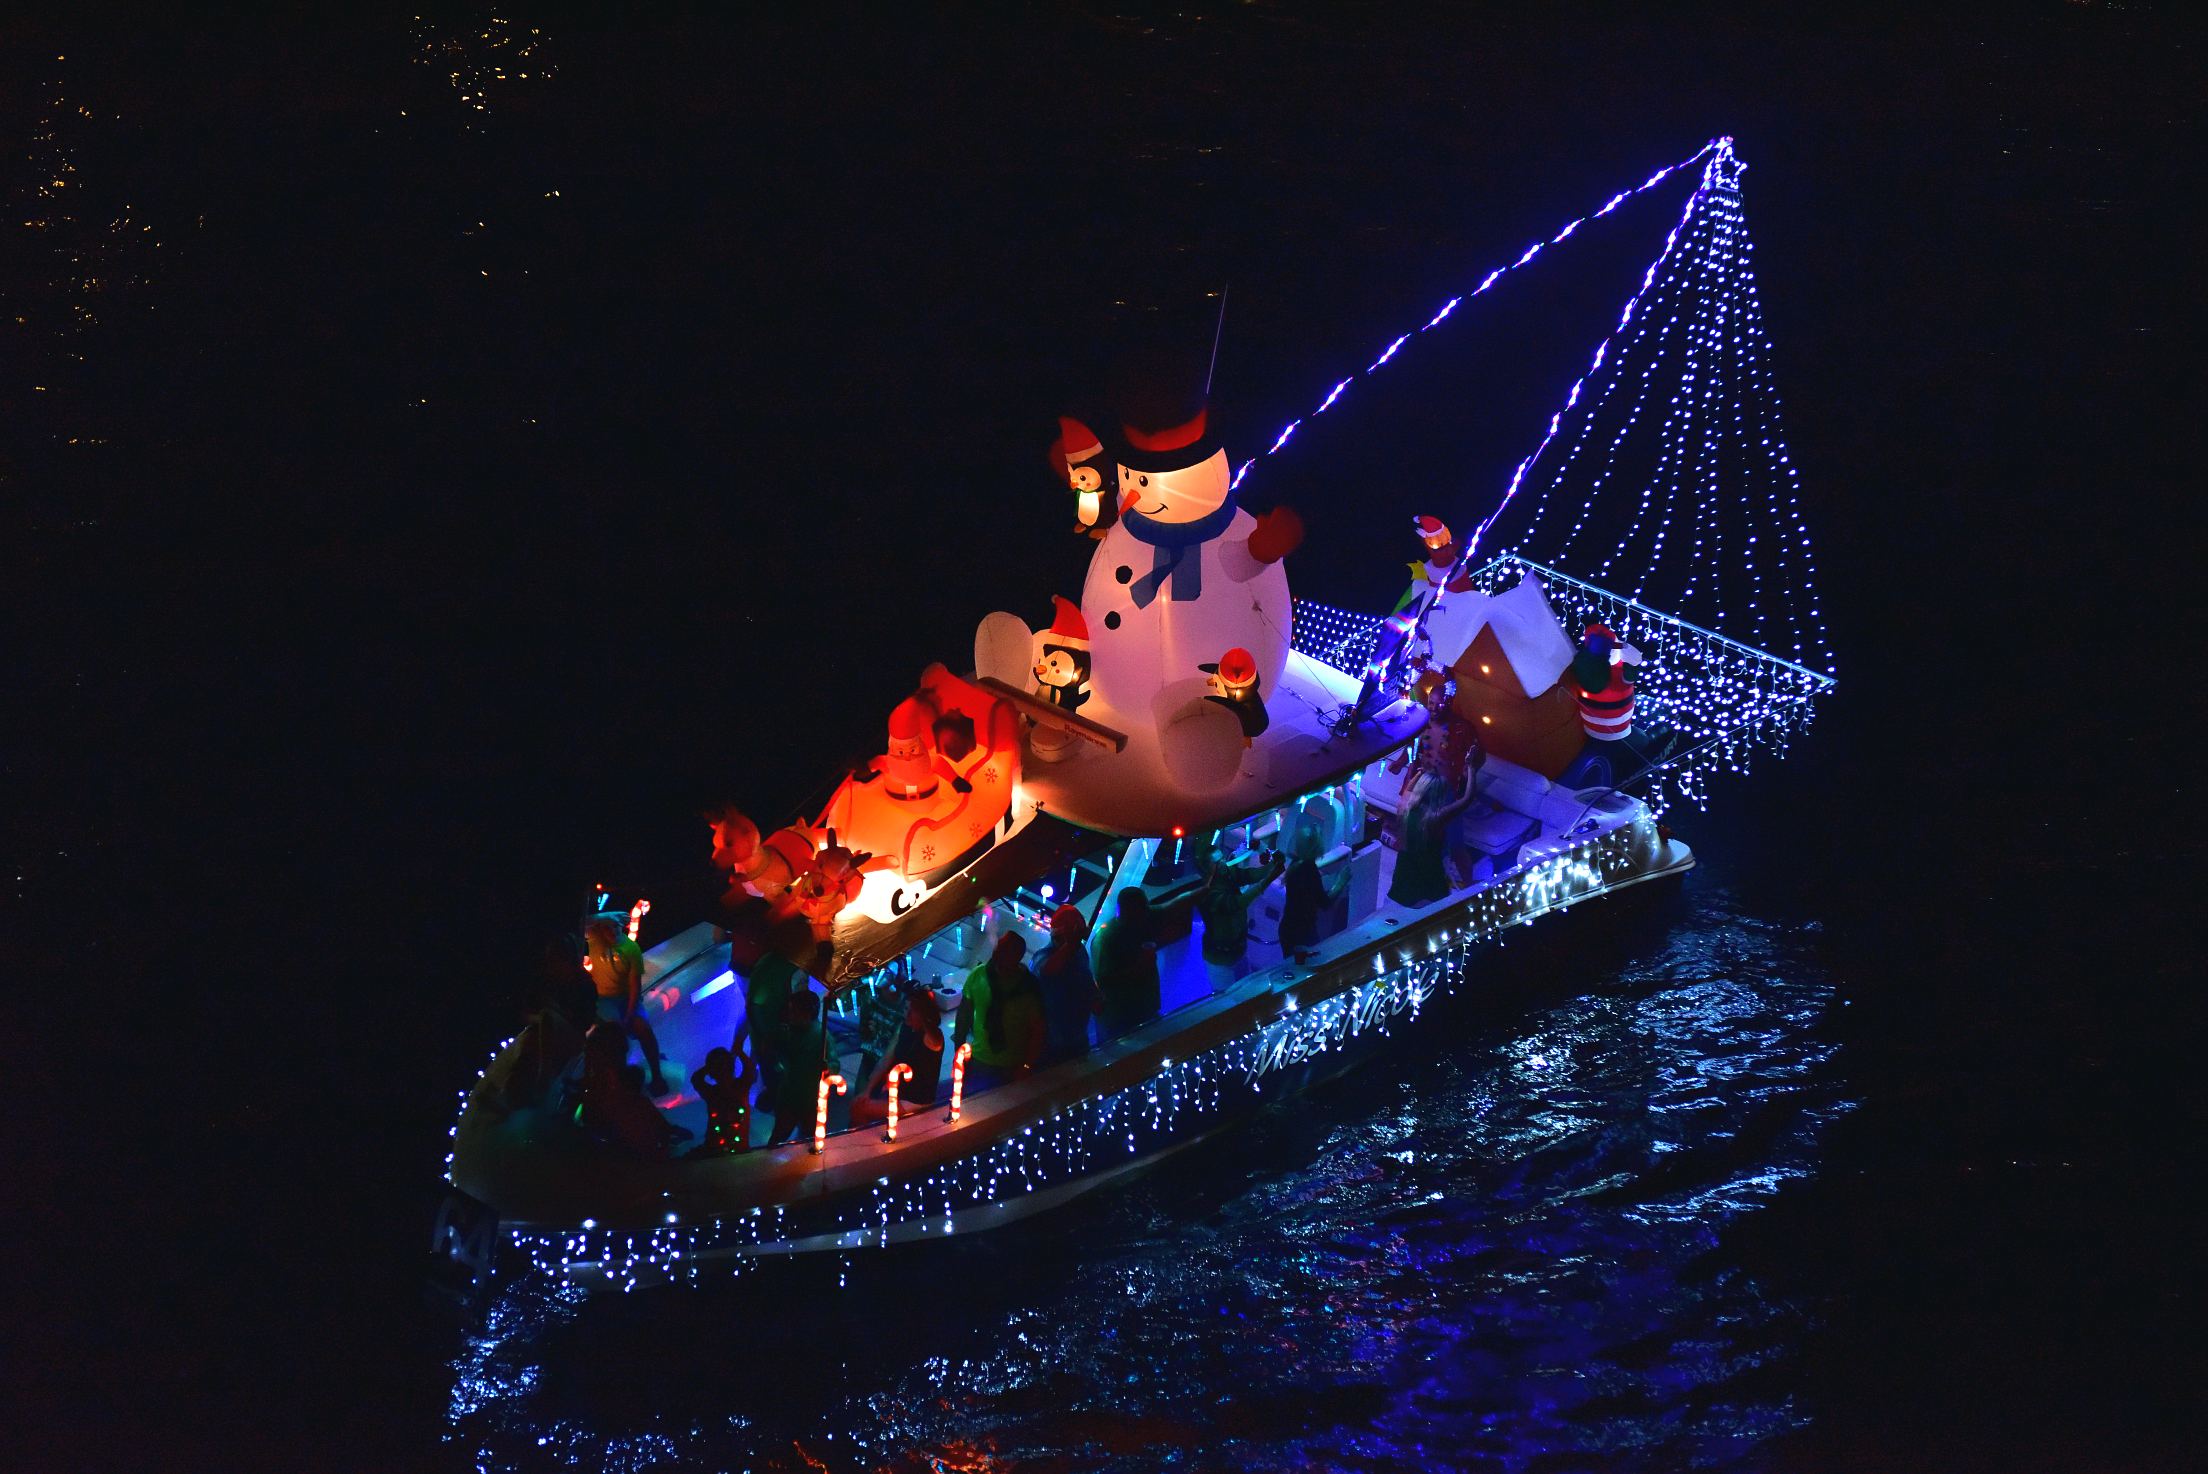 Miss Nicole, boat number 64 in the 2021 Winterfest Boat Parade